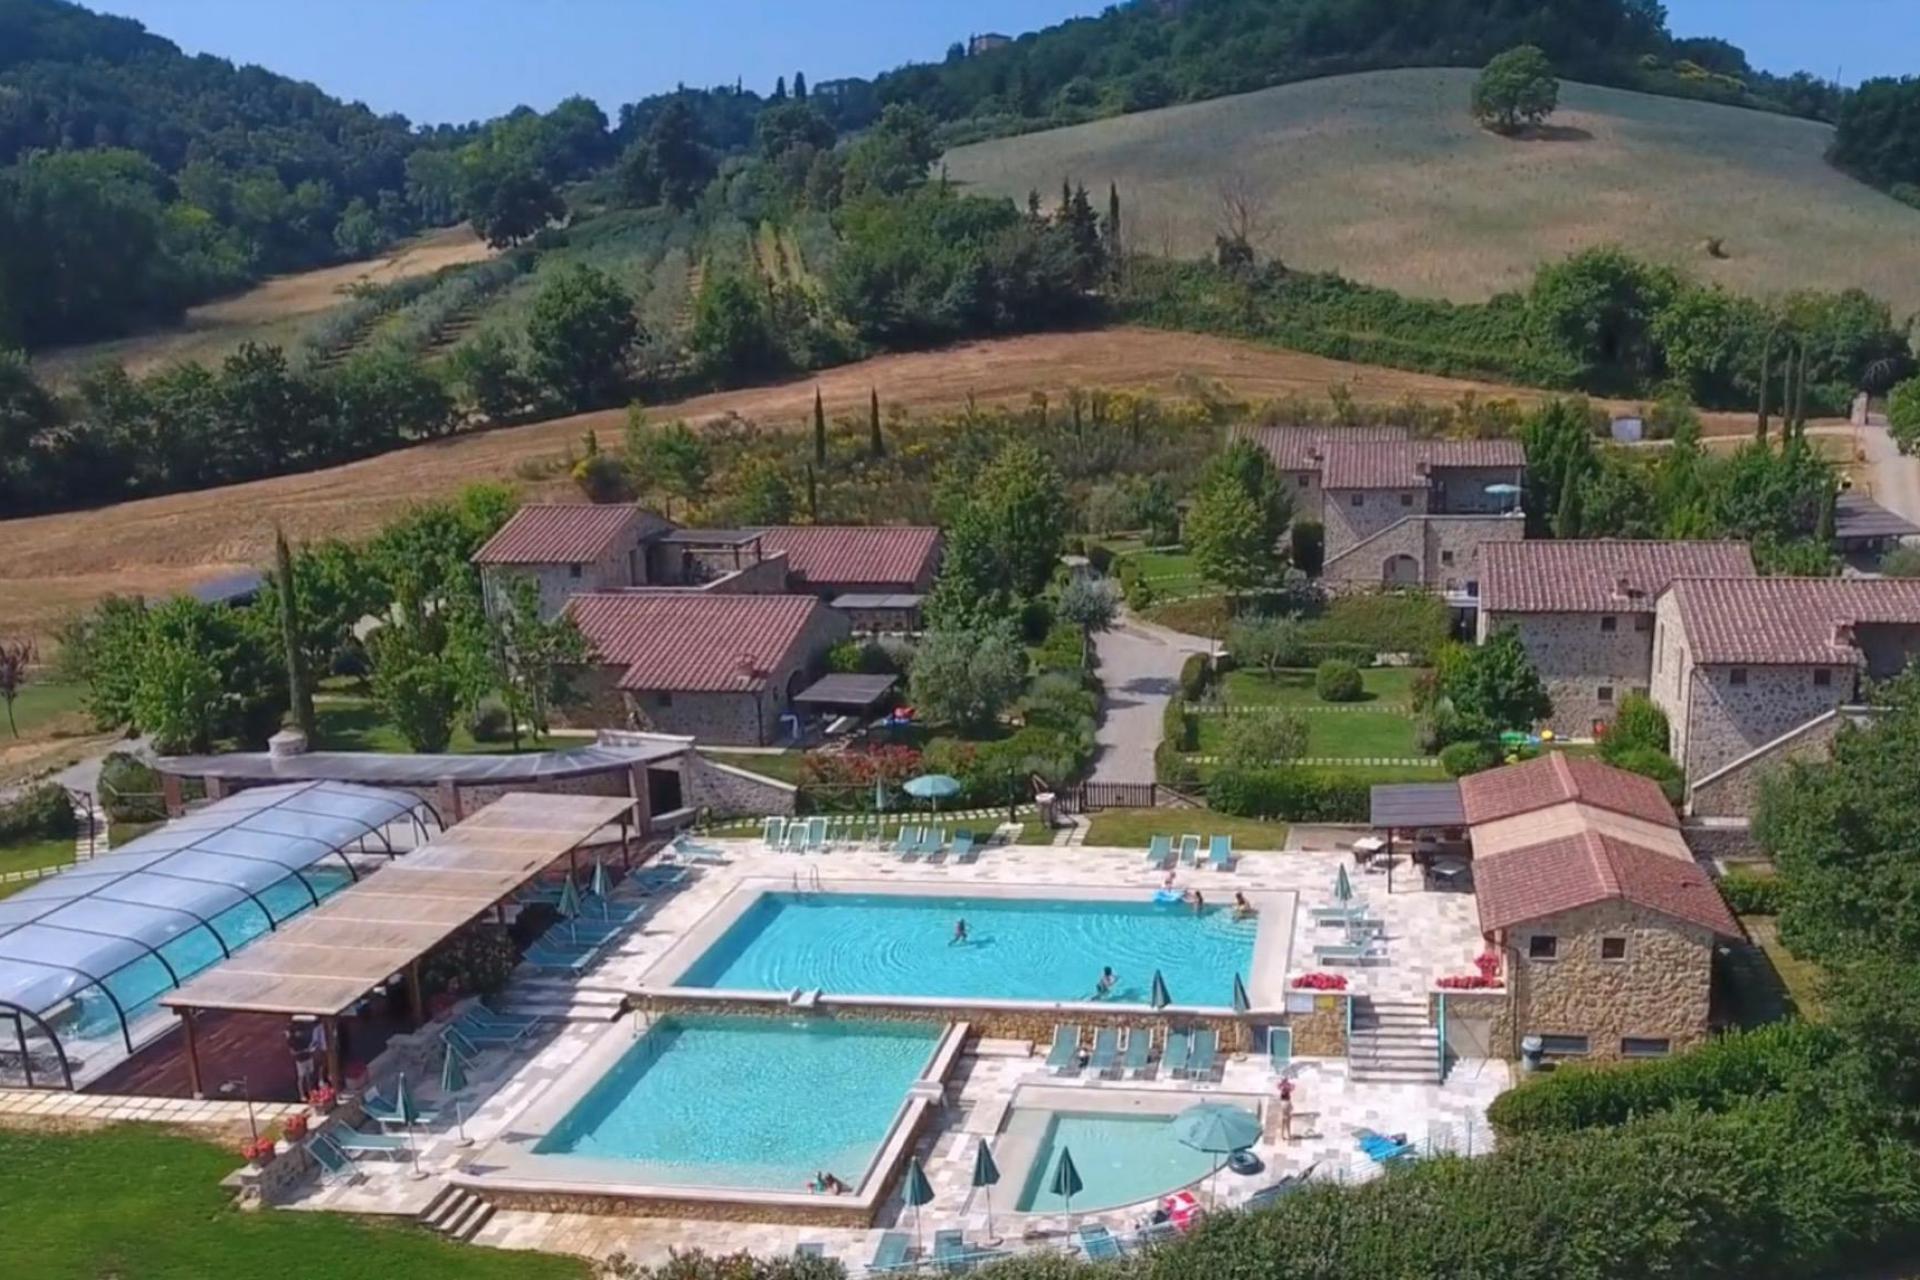 1. Residence in Tuscany ideal for families